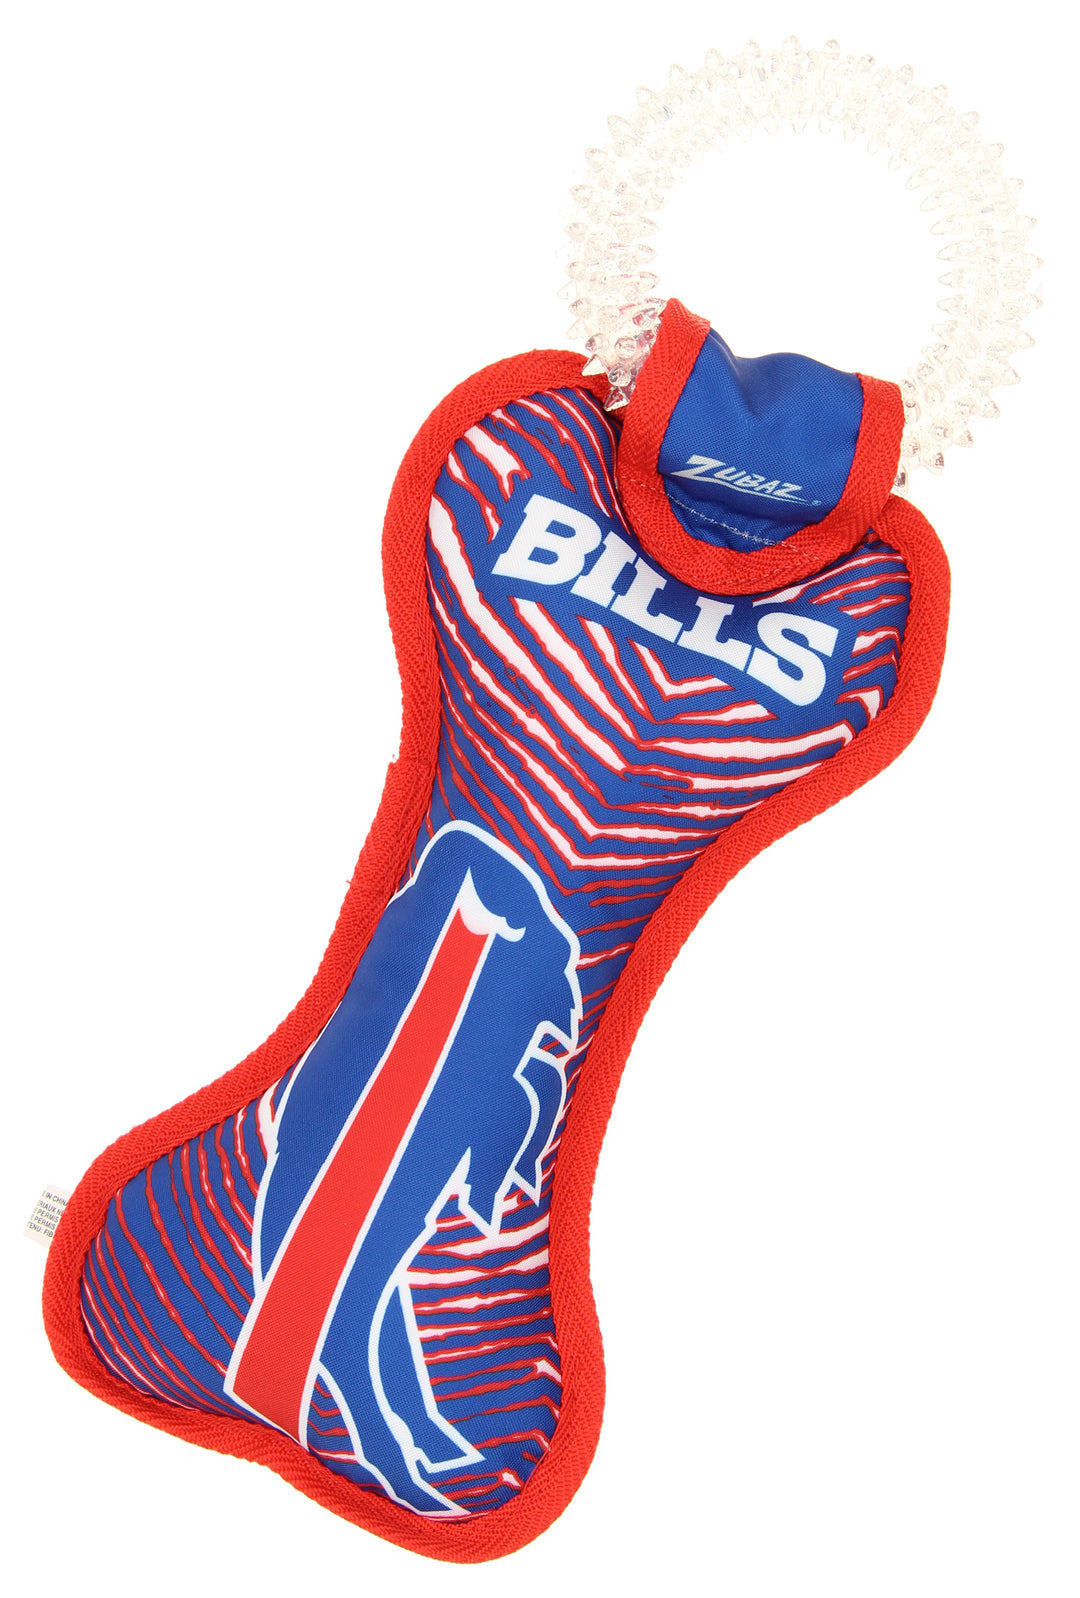 Zubaz X Pets First NFL Buffalo Bills Team Ring Tug Toy for Dogs